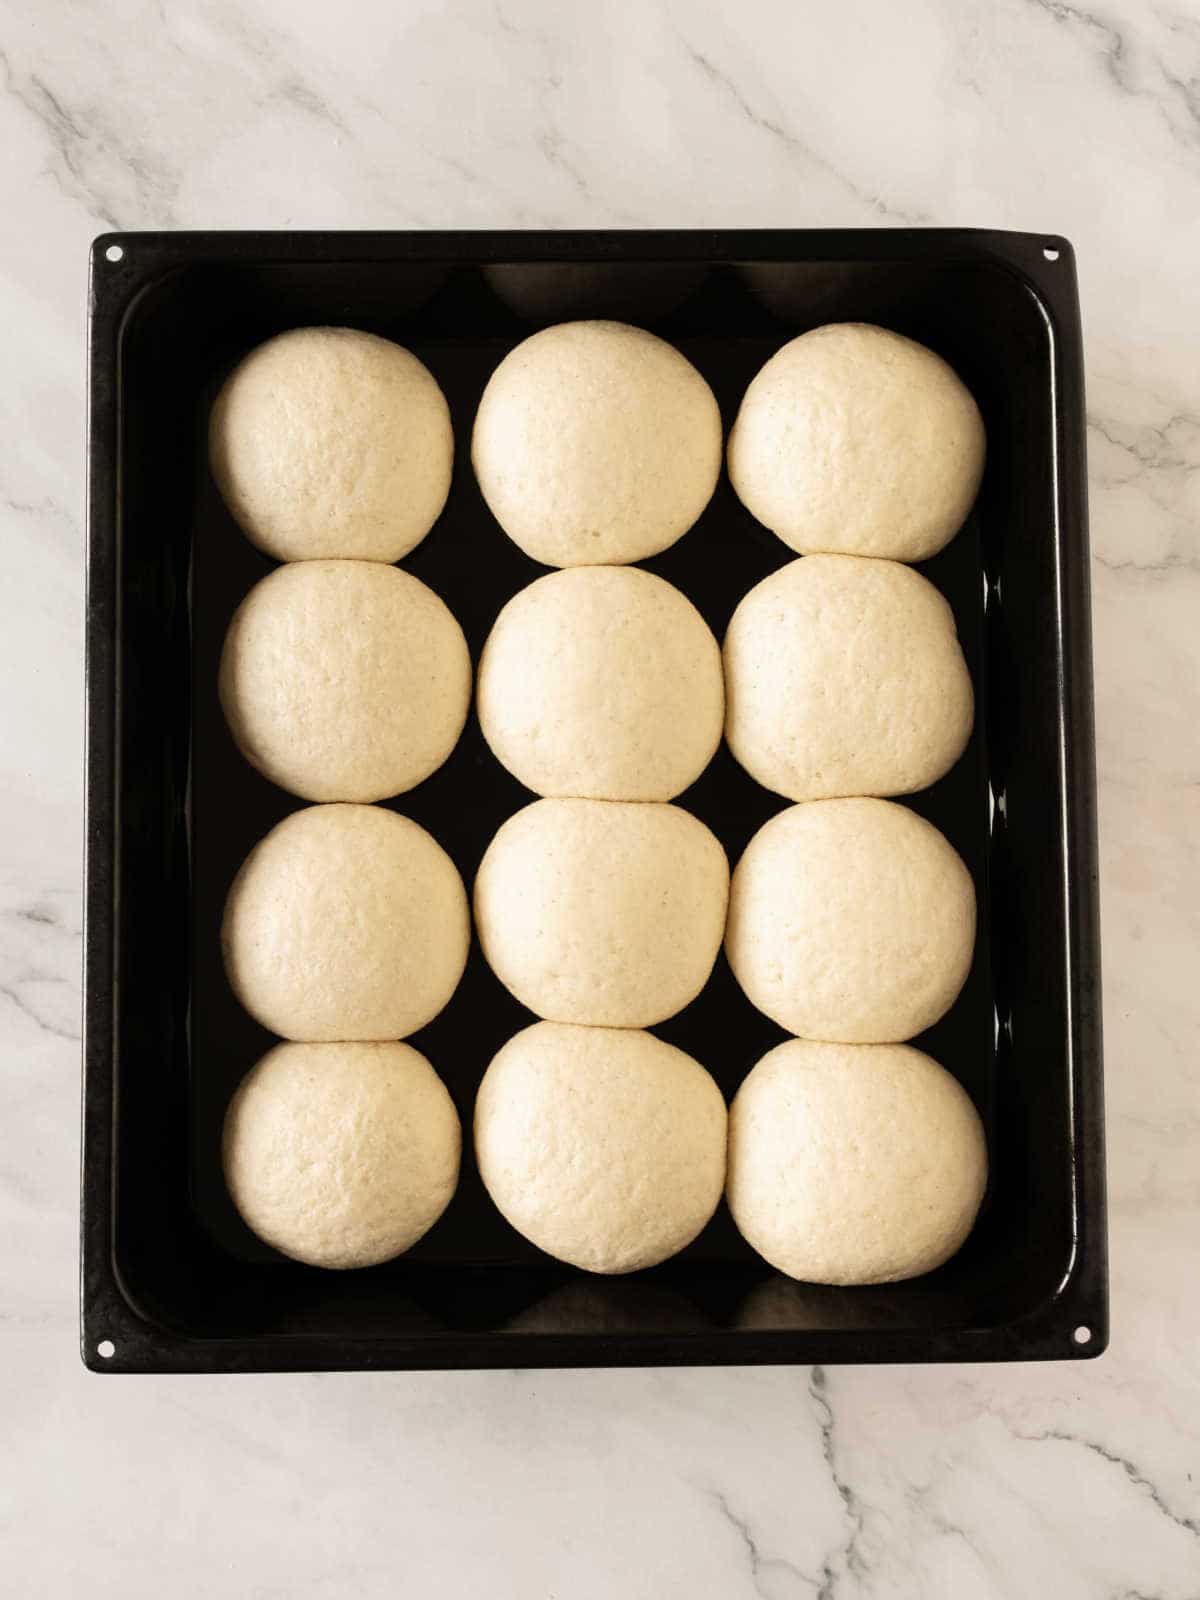 Puffed bread dough balls in rows on a black oven tray. White marbled surface.